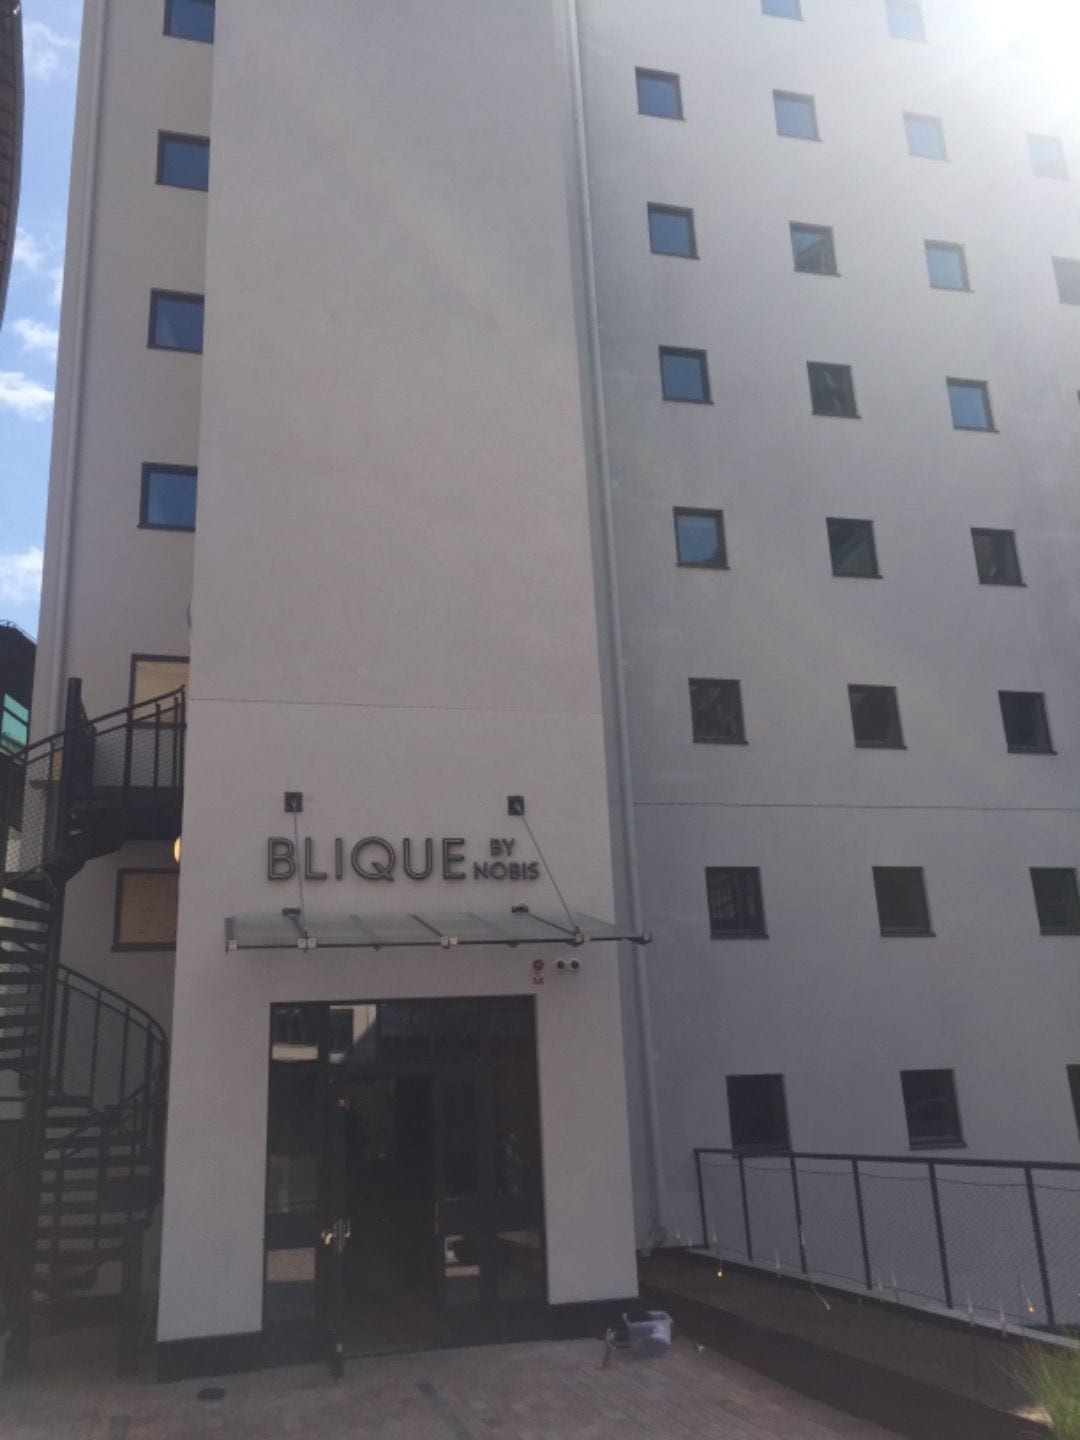 Photo from Blique by Nobis by Peter B. (26/04/2019)